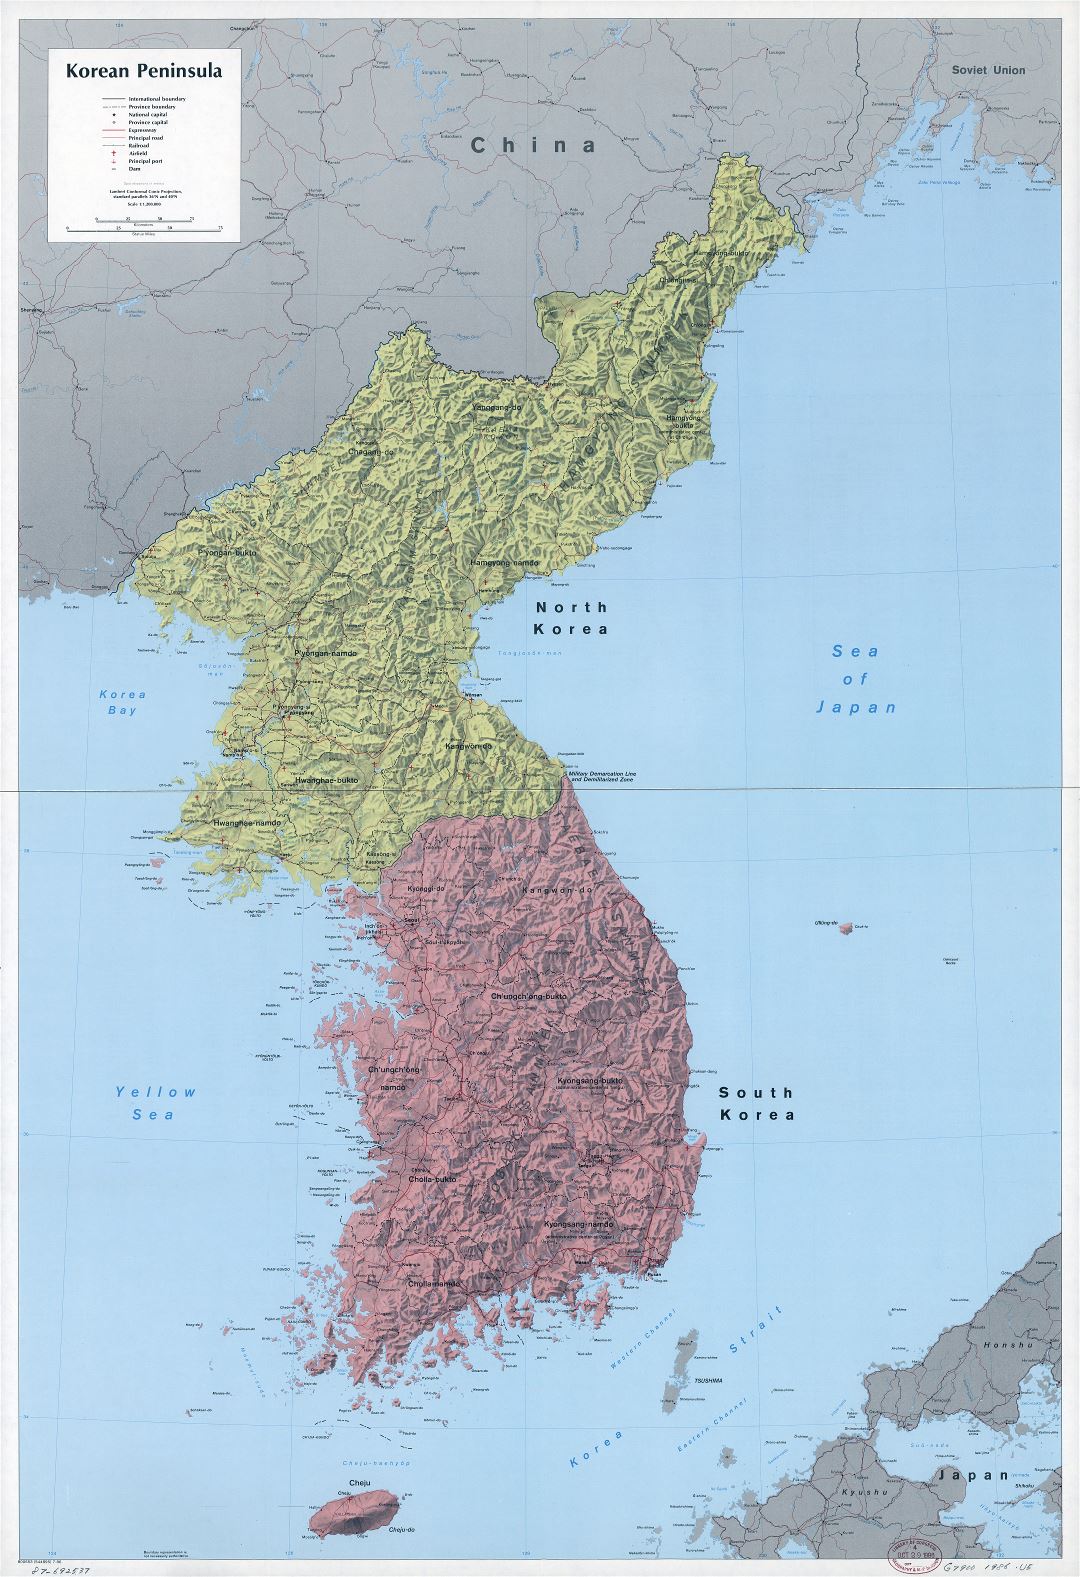 Large scale detailed political and administrative map of Korean Peninsula with relief, roads, railroads, cities, ports, airports and other marks - 1986